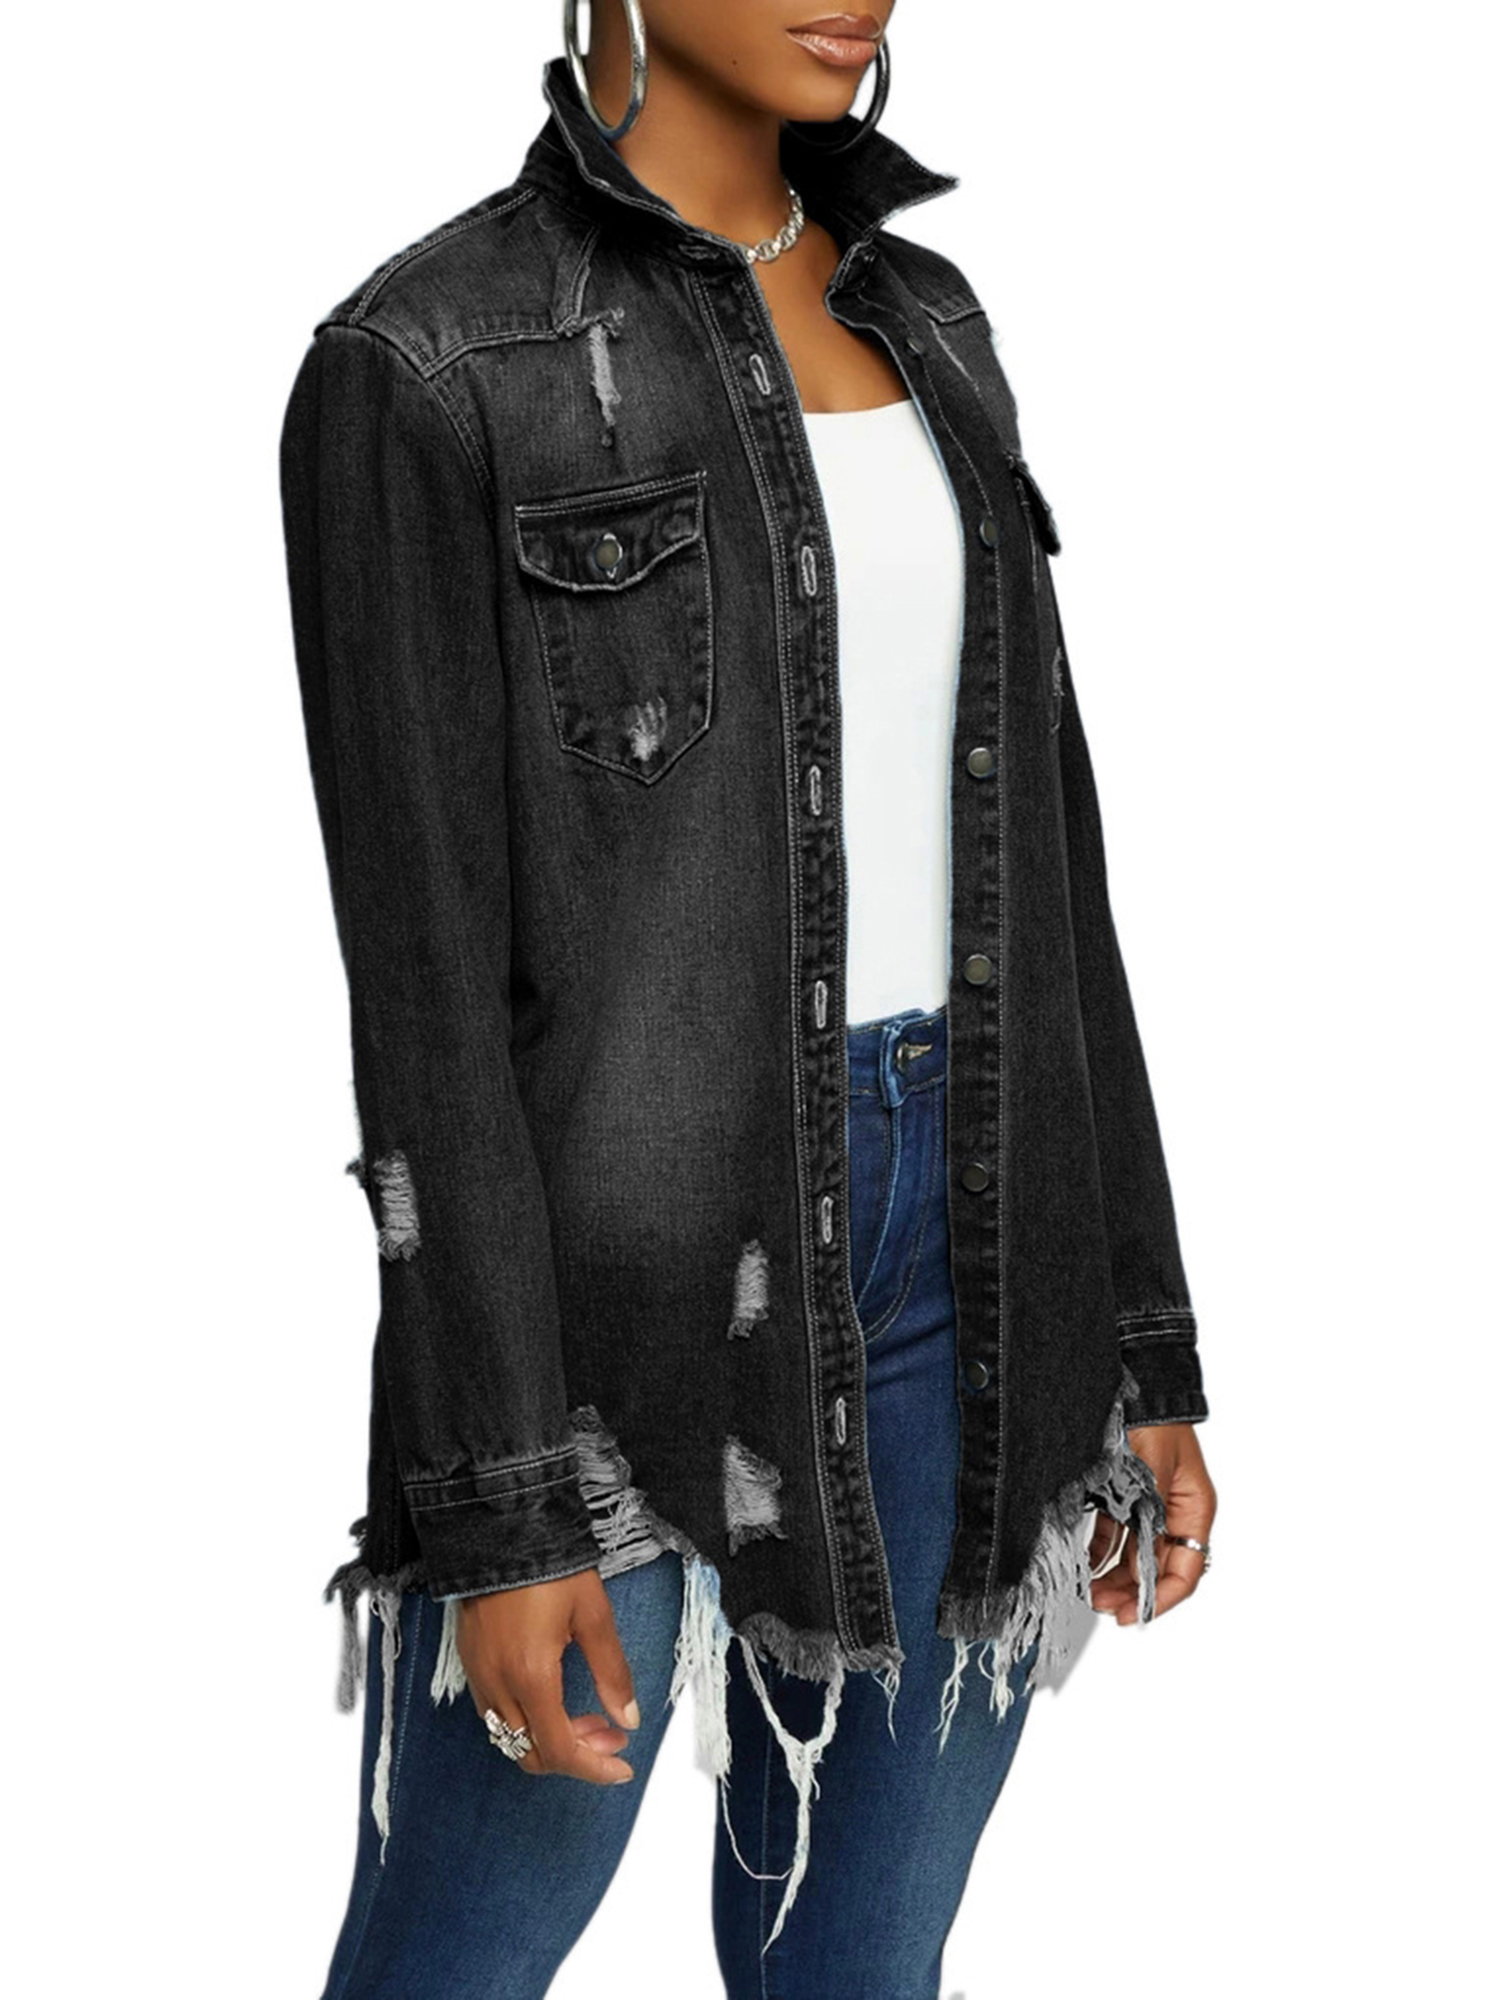 Ma&Baby Women Denim Jacket Long Sleeve Lapel Button Down Ripped Jeans Jacket Coat Plus Size - image 1 of 4